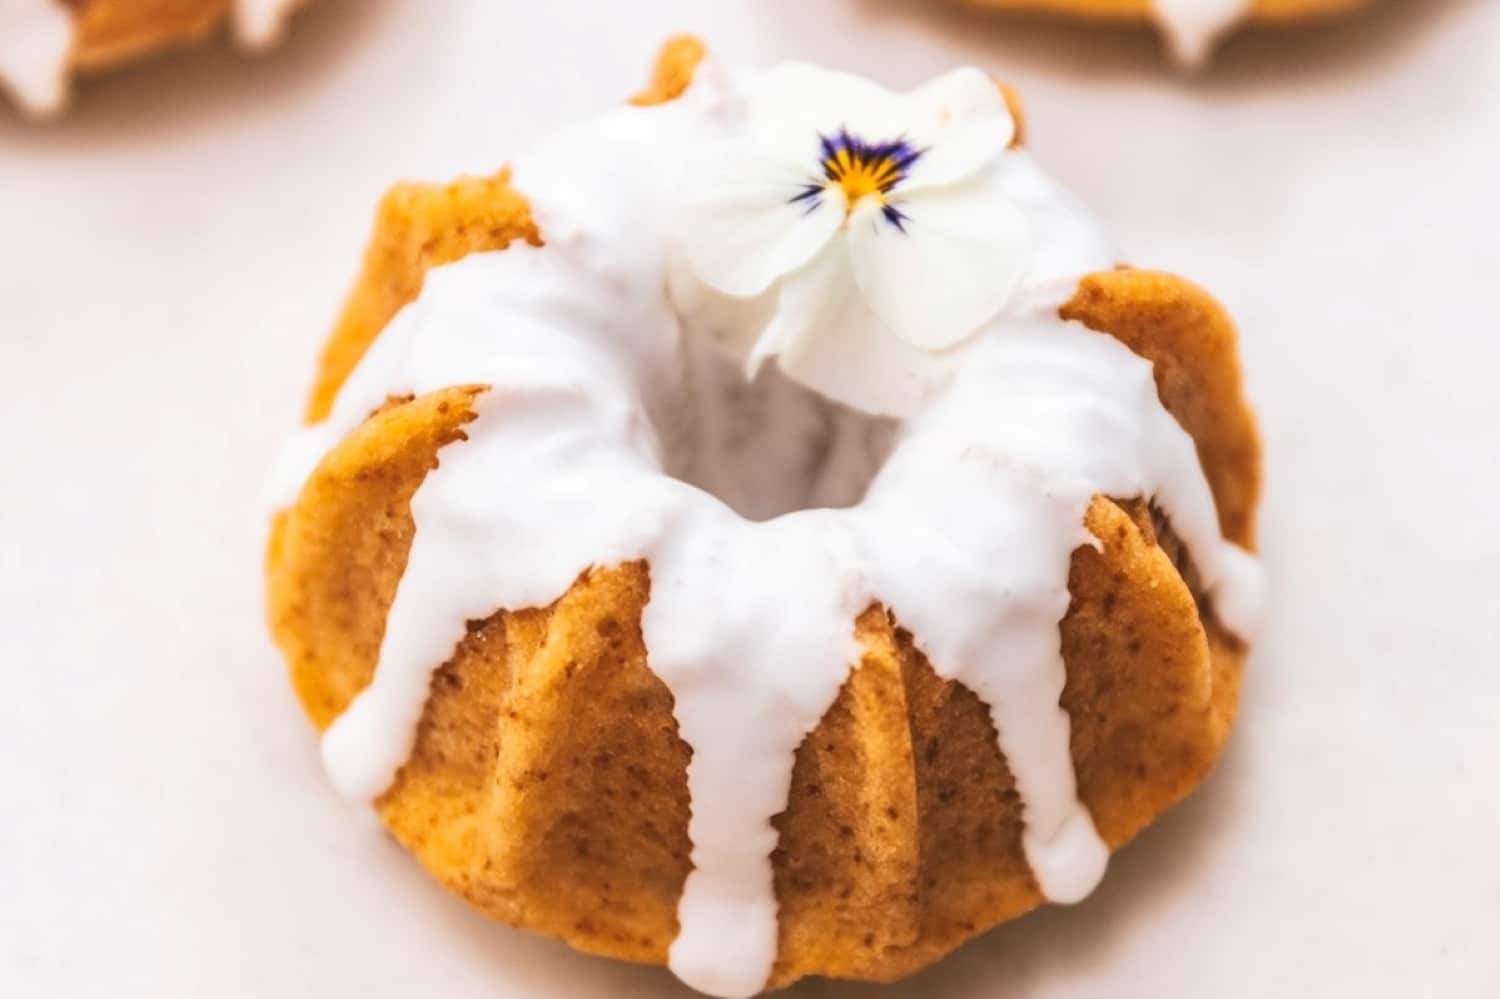 mother's day baking recipes